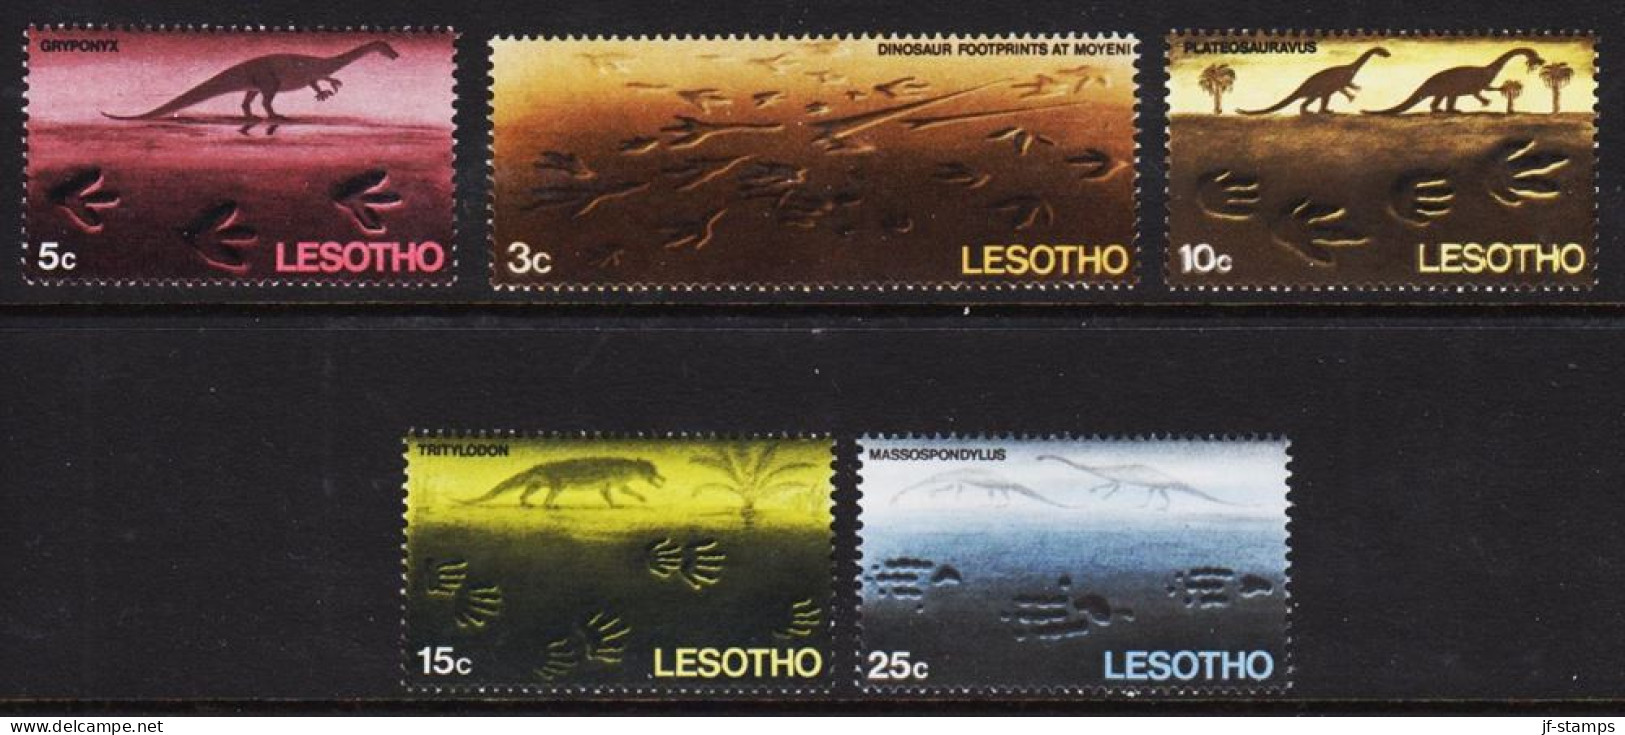 1970. LESOTHO. Prehistoric Animals, Complete Set With 5 Stamps. Never Hinged.  (Michel 75-79) - JF544654 - Lesotho (1966-...)